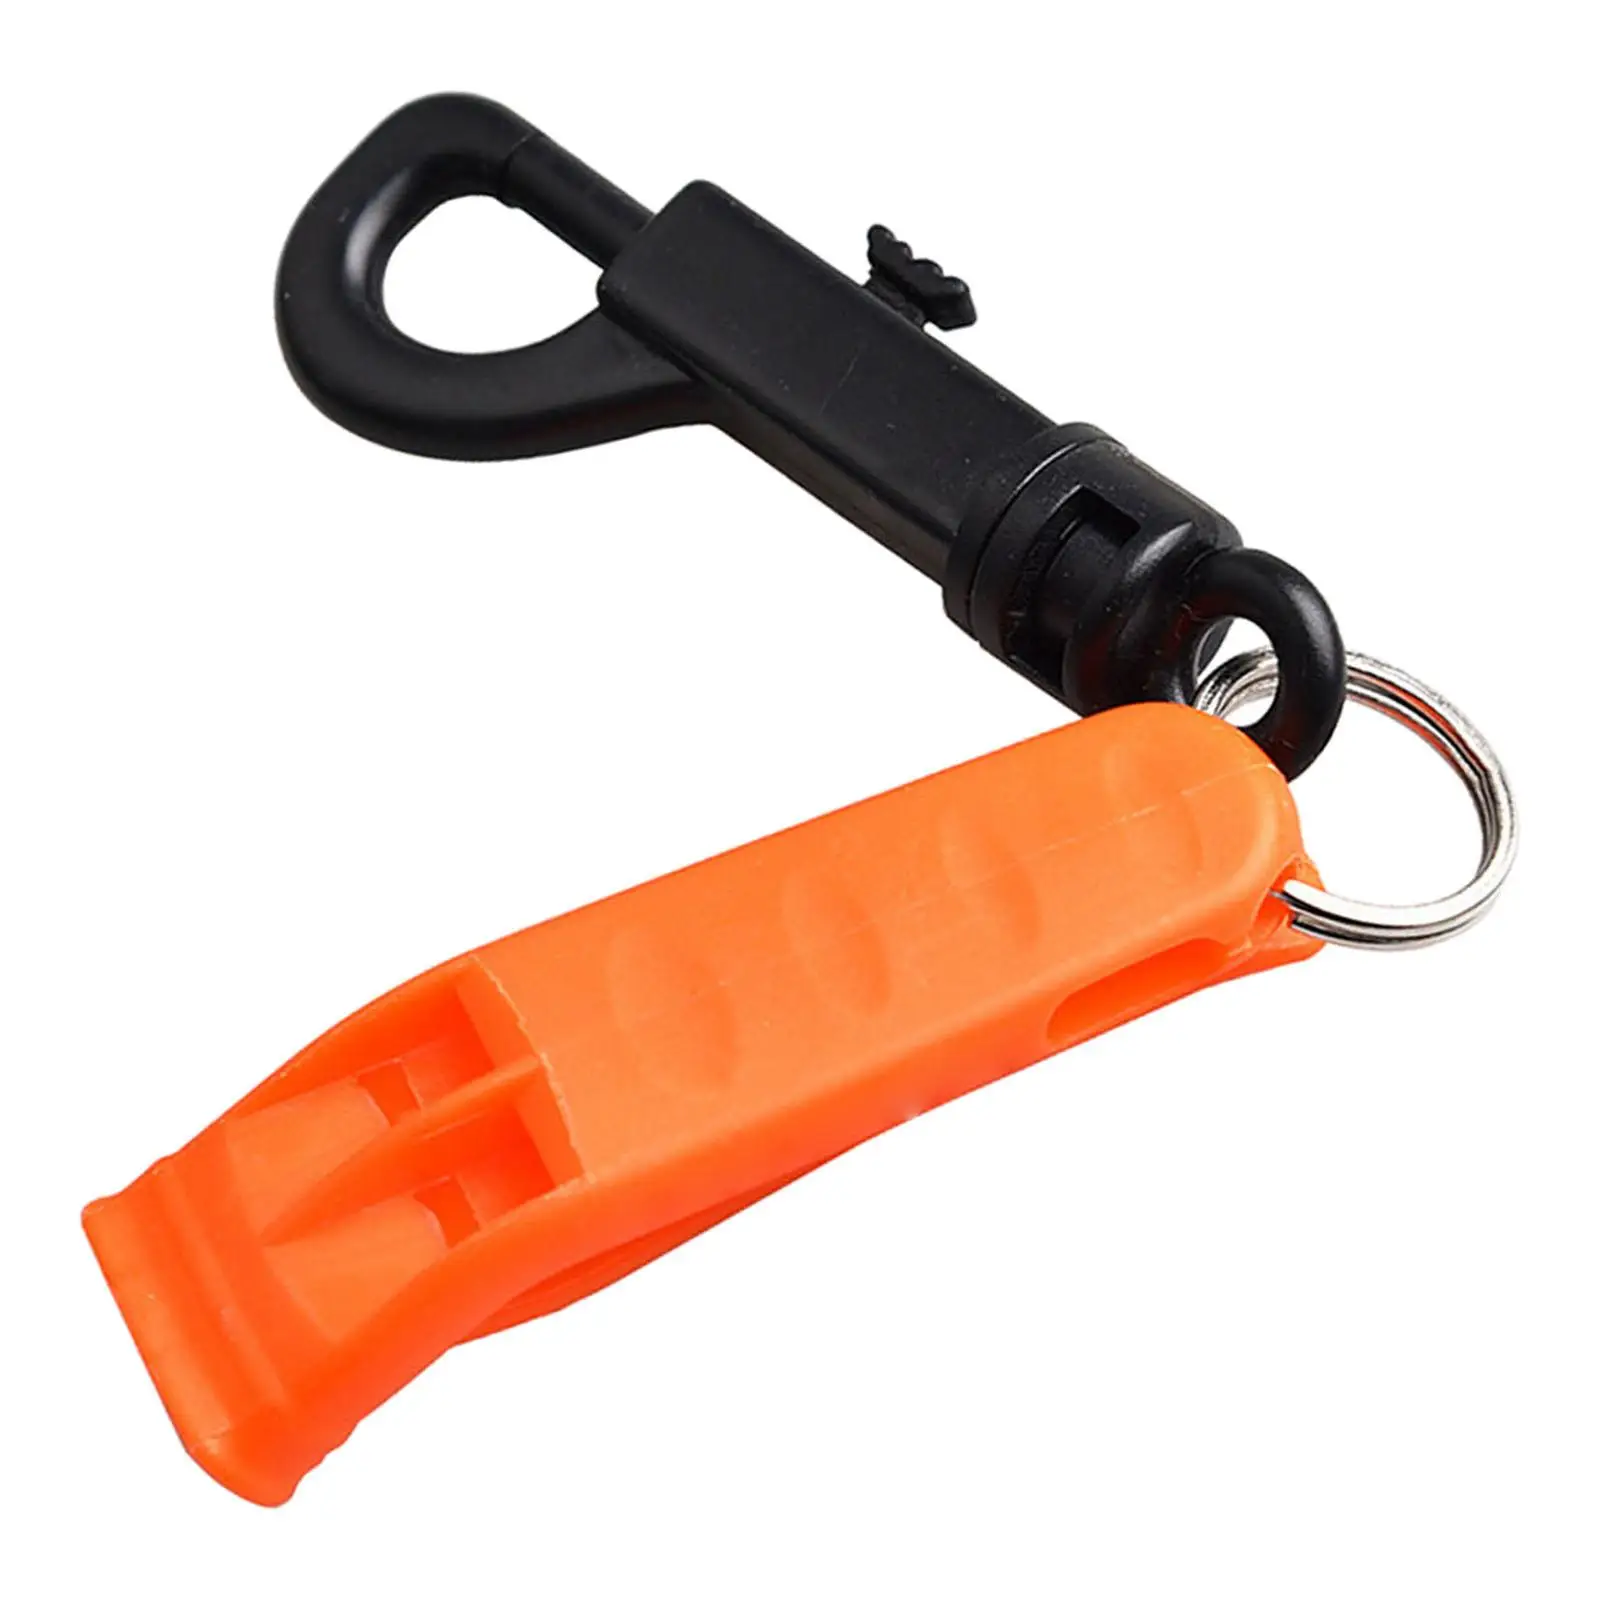 Lightweight Emergency Whistle Survival Whistle with Hook for Boating